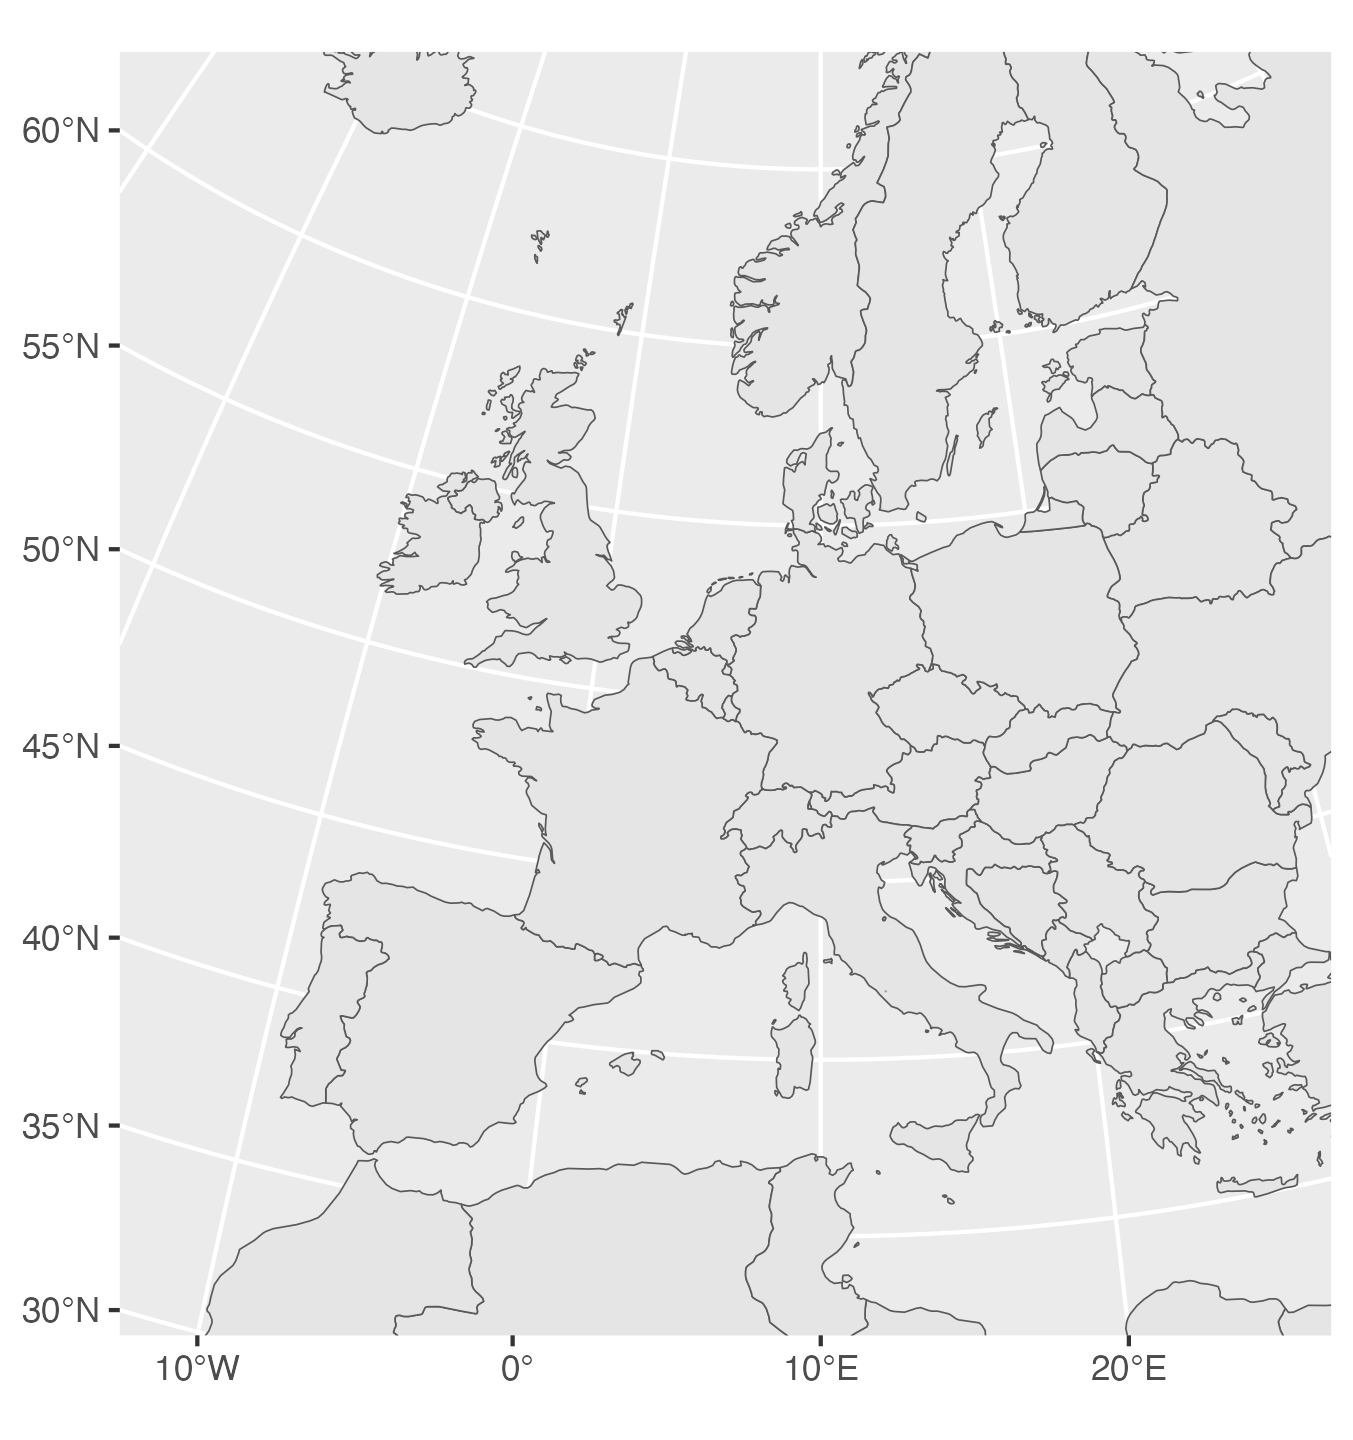 World map cropped to just show part of Europe